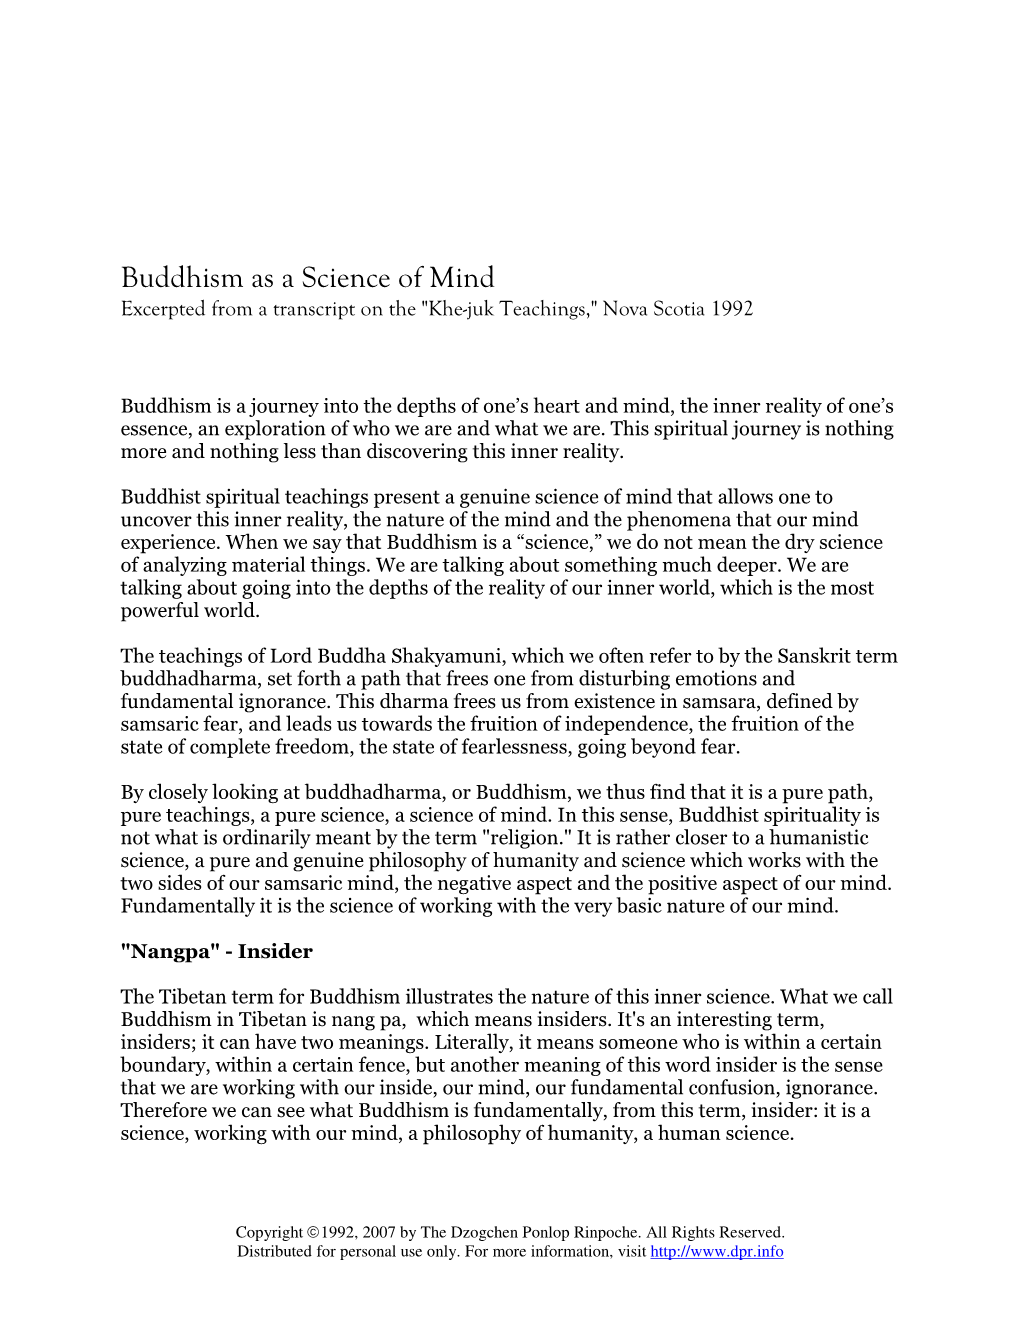 Buddhism As a Science of Mind Excerpted from a Transcript on the "Khe-Juk Teachings," Nova Scotia 1992